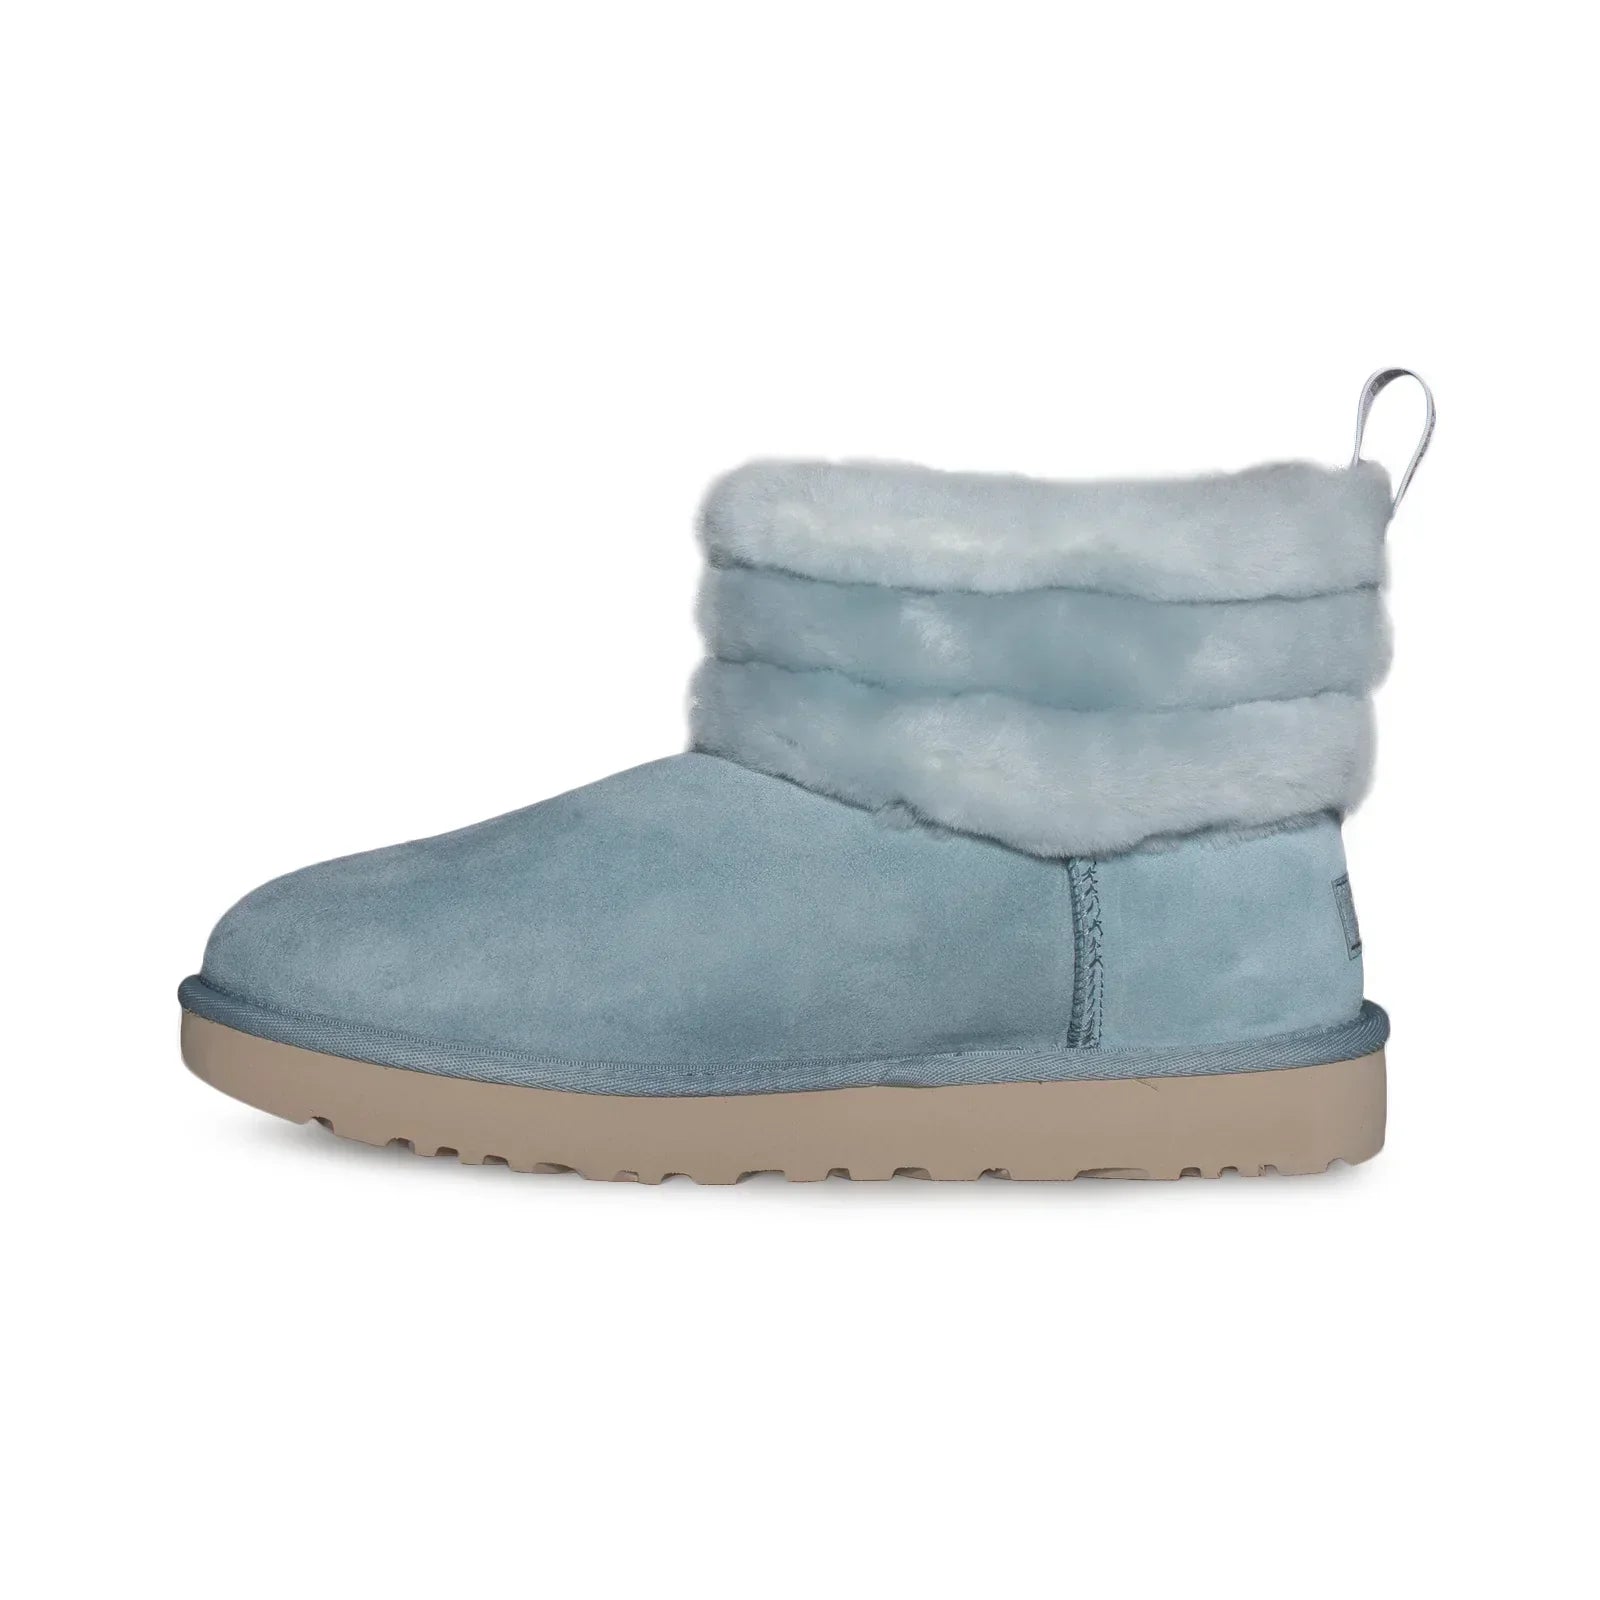 UGG Fluff Mini Quilted Succulent Boots - Women's